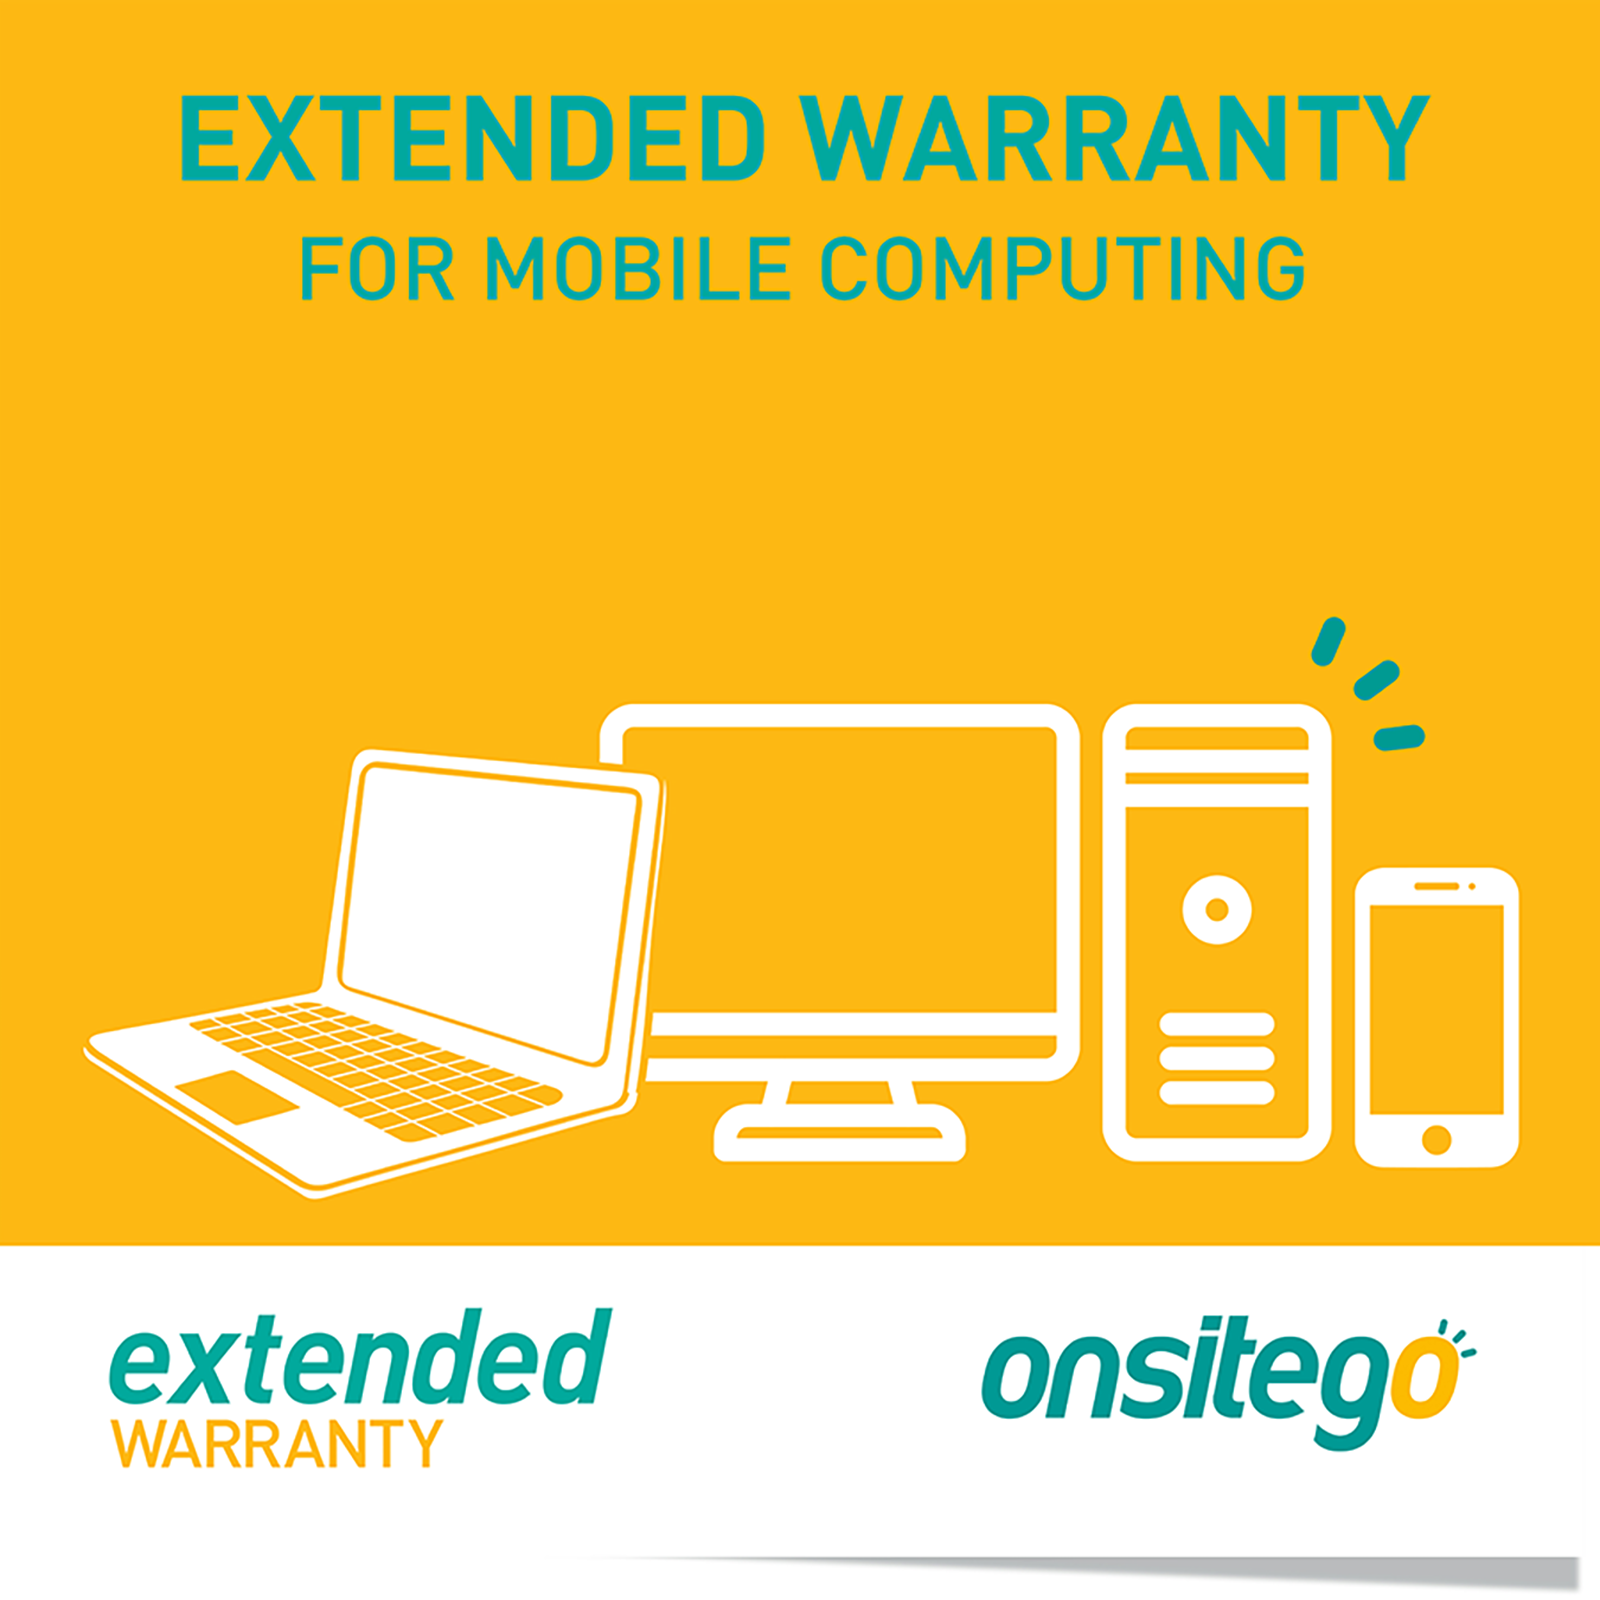 Onsitego 1 Year Extended Warranty for Laptop (Rs.250,000 - Rs.300,000)_1